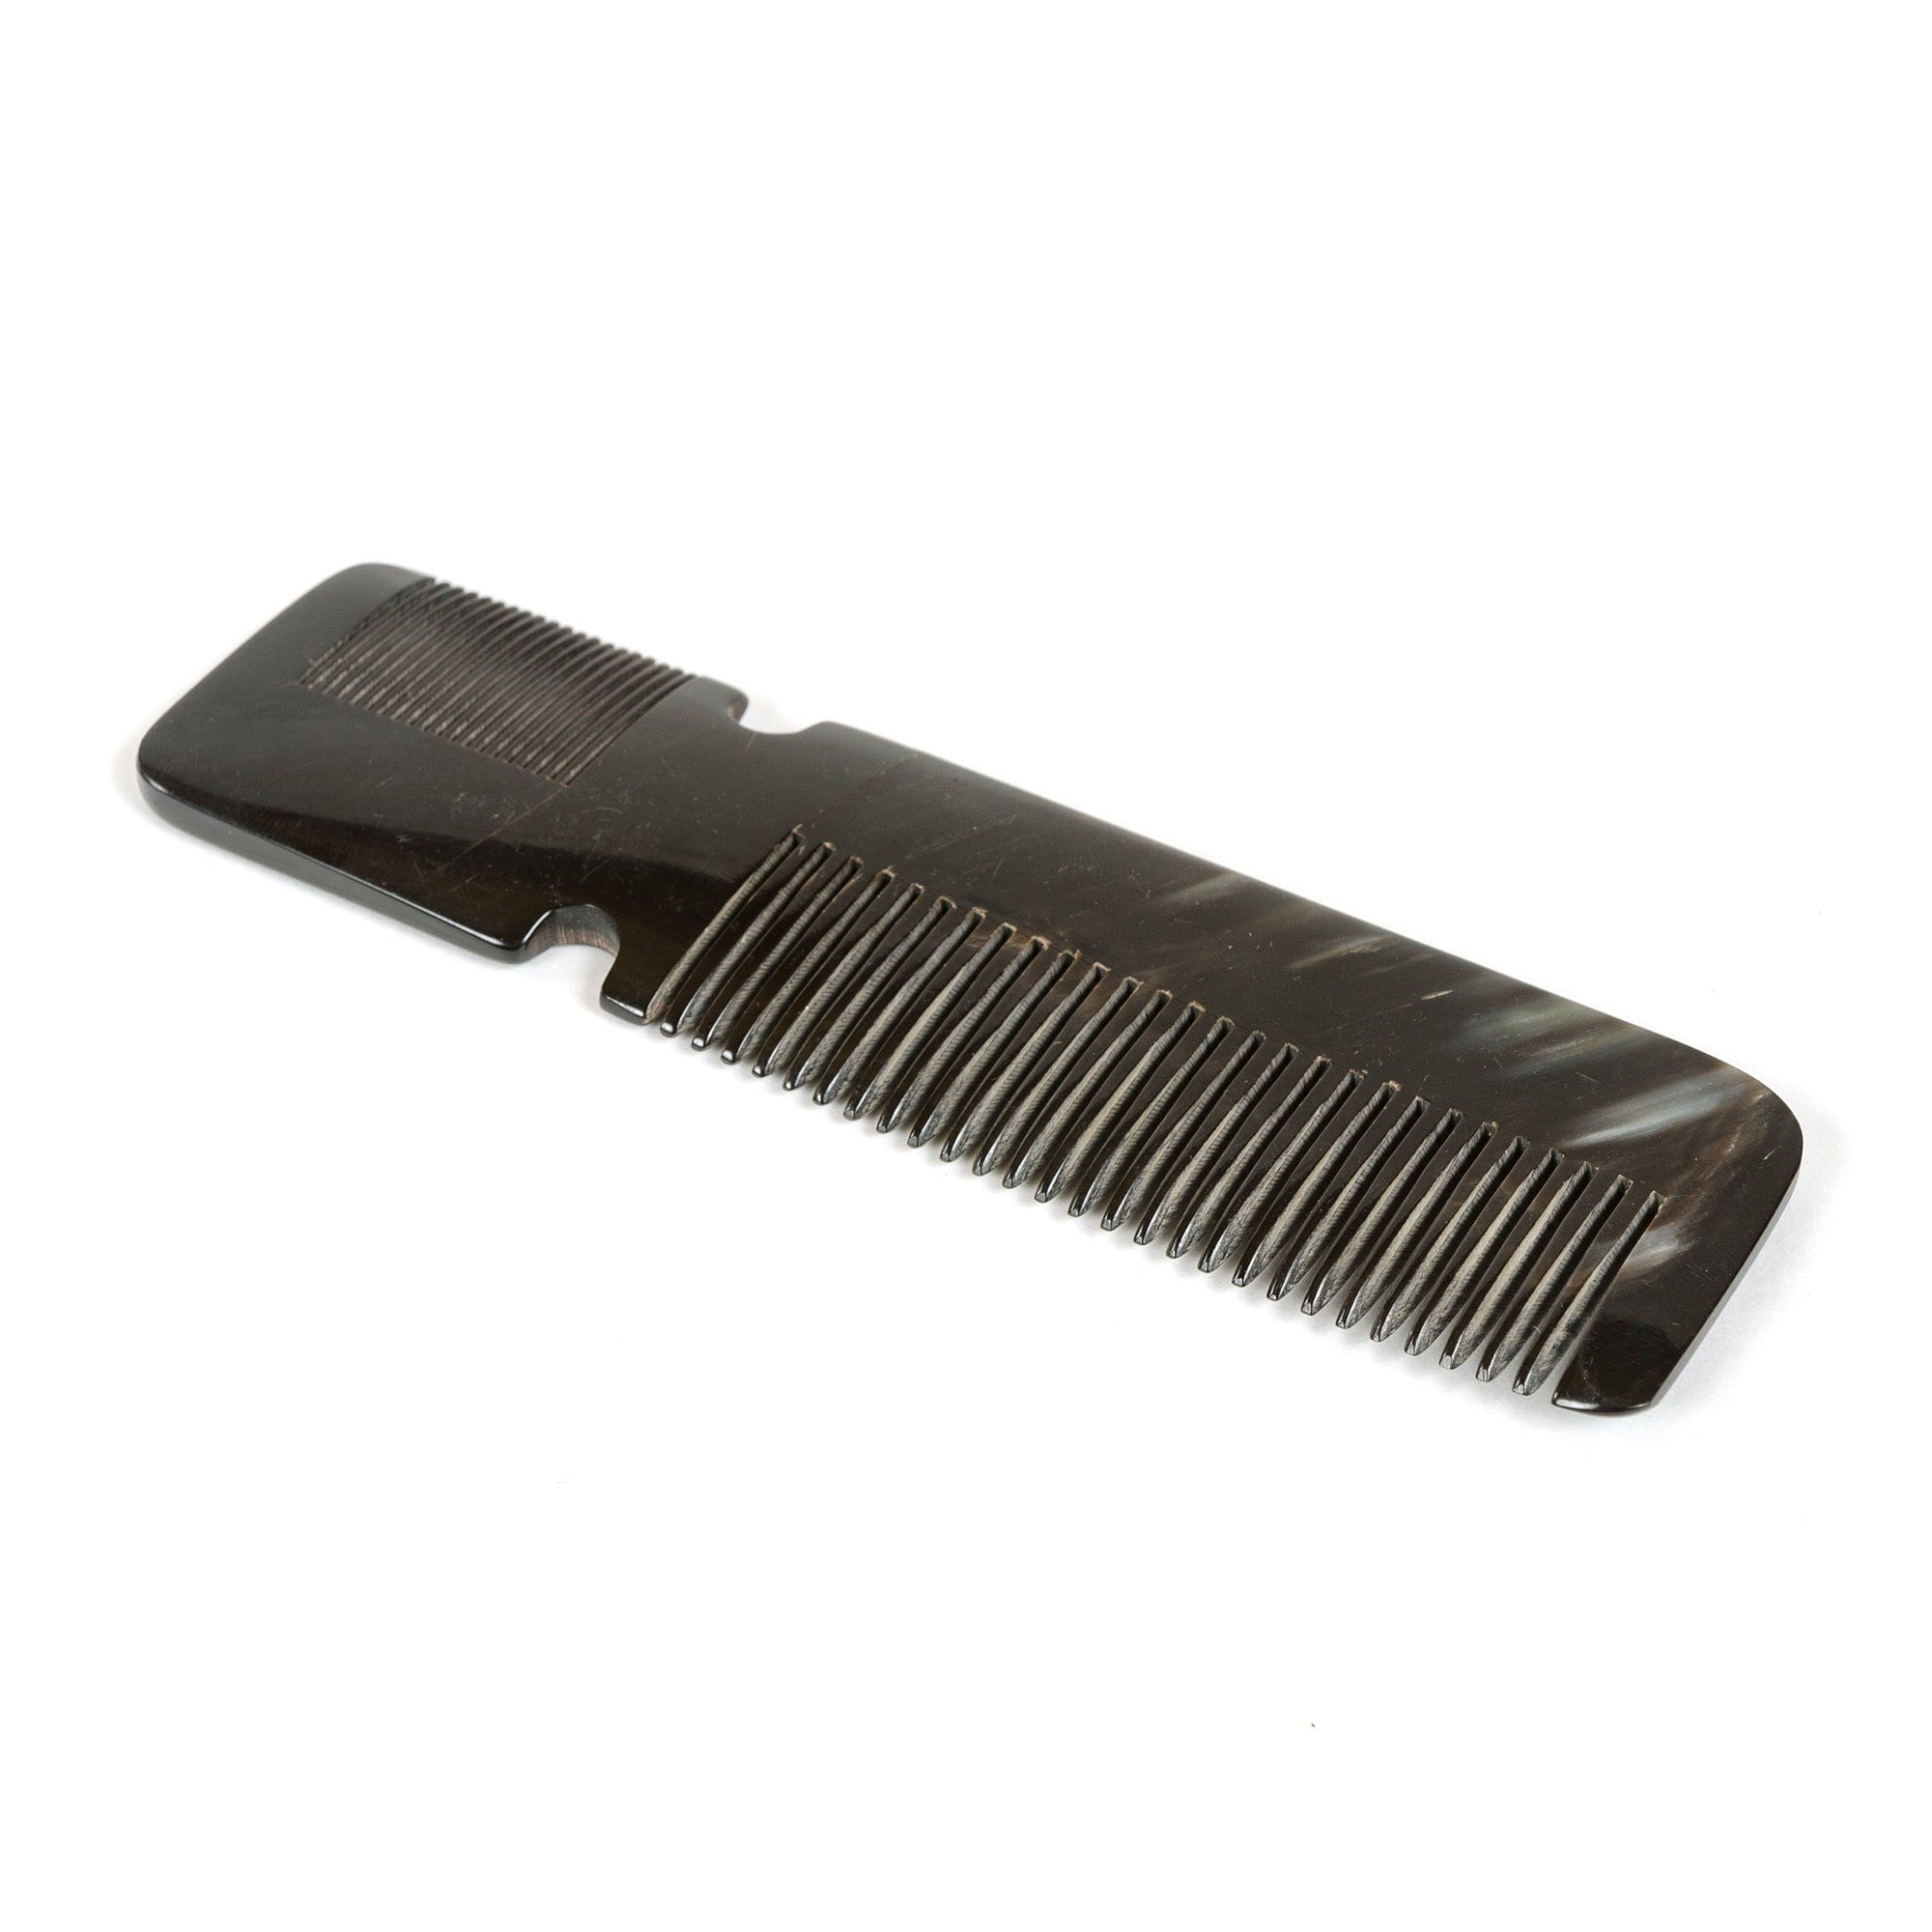 Comb by Carl Aubock